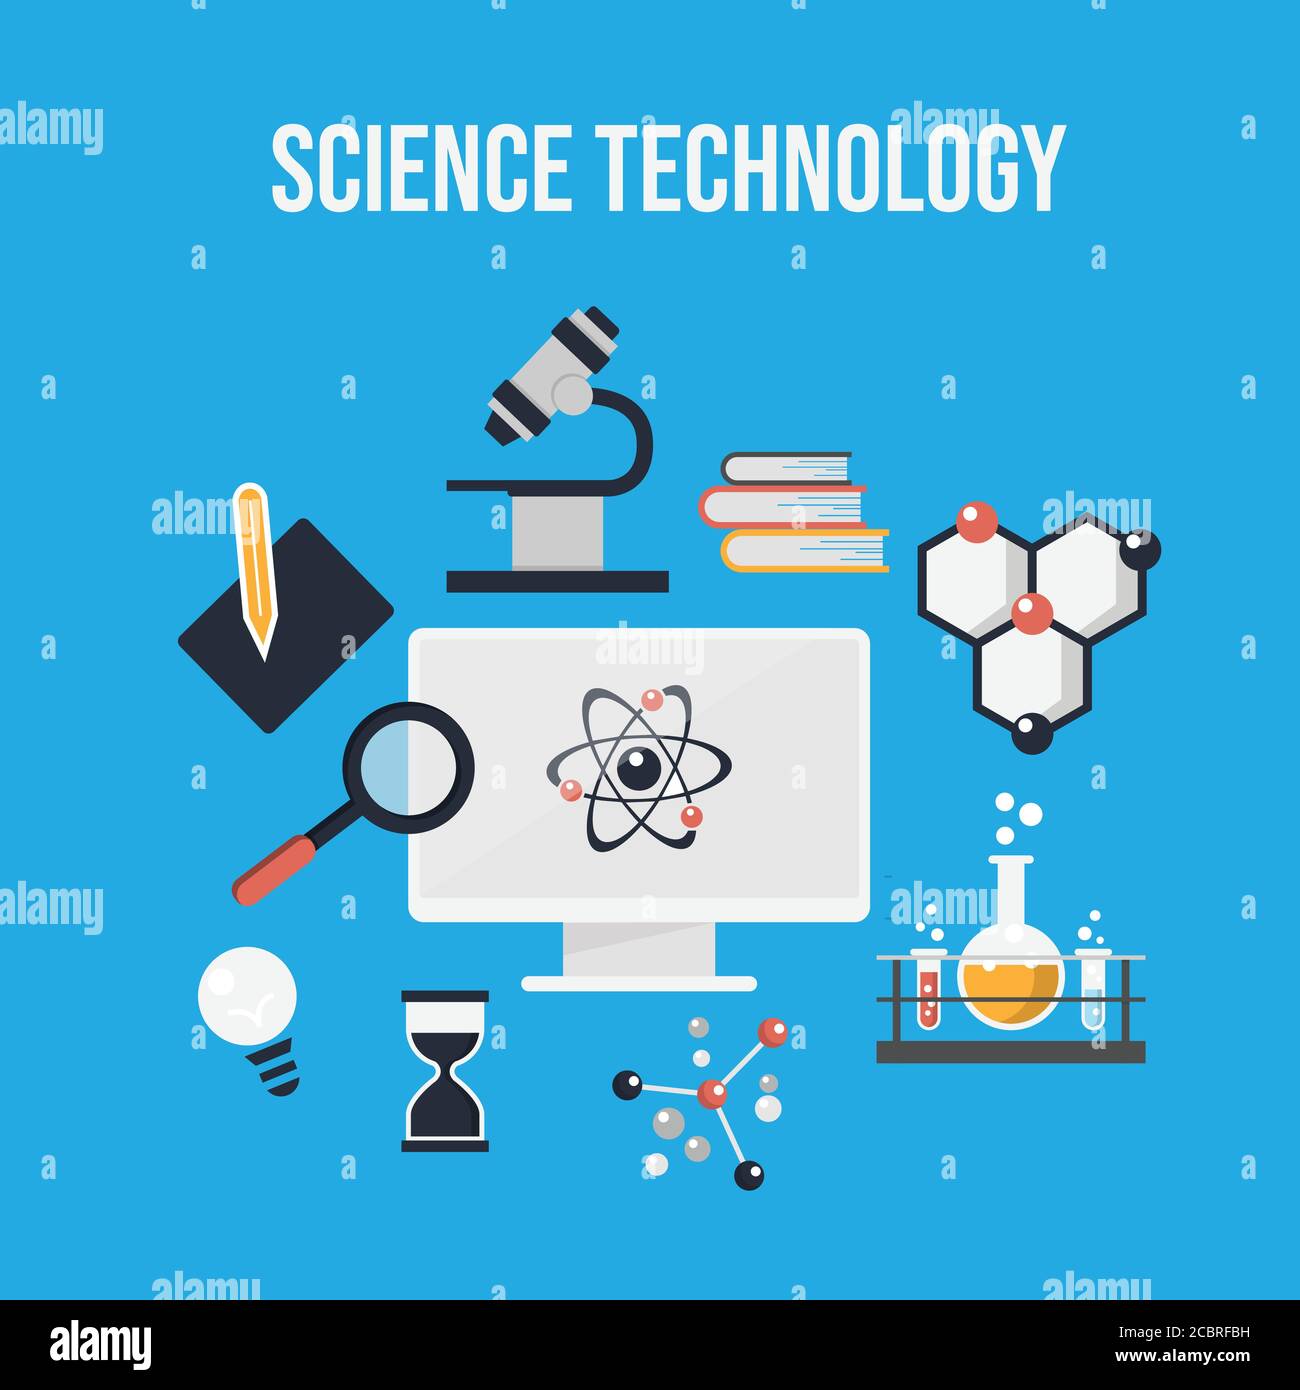 Flat design concept of science and technology. Science technology research laboratory workspace modern flat design style Stock Vector